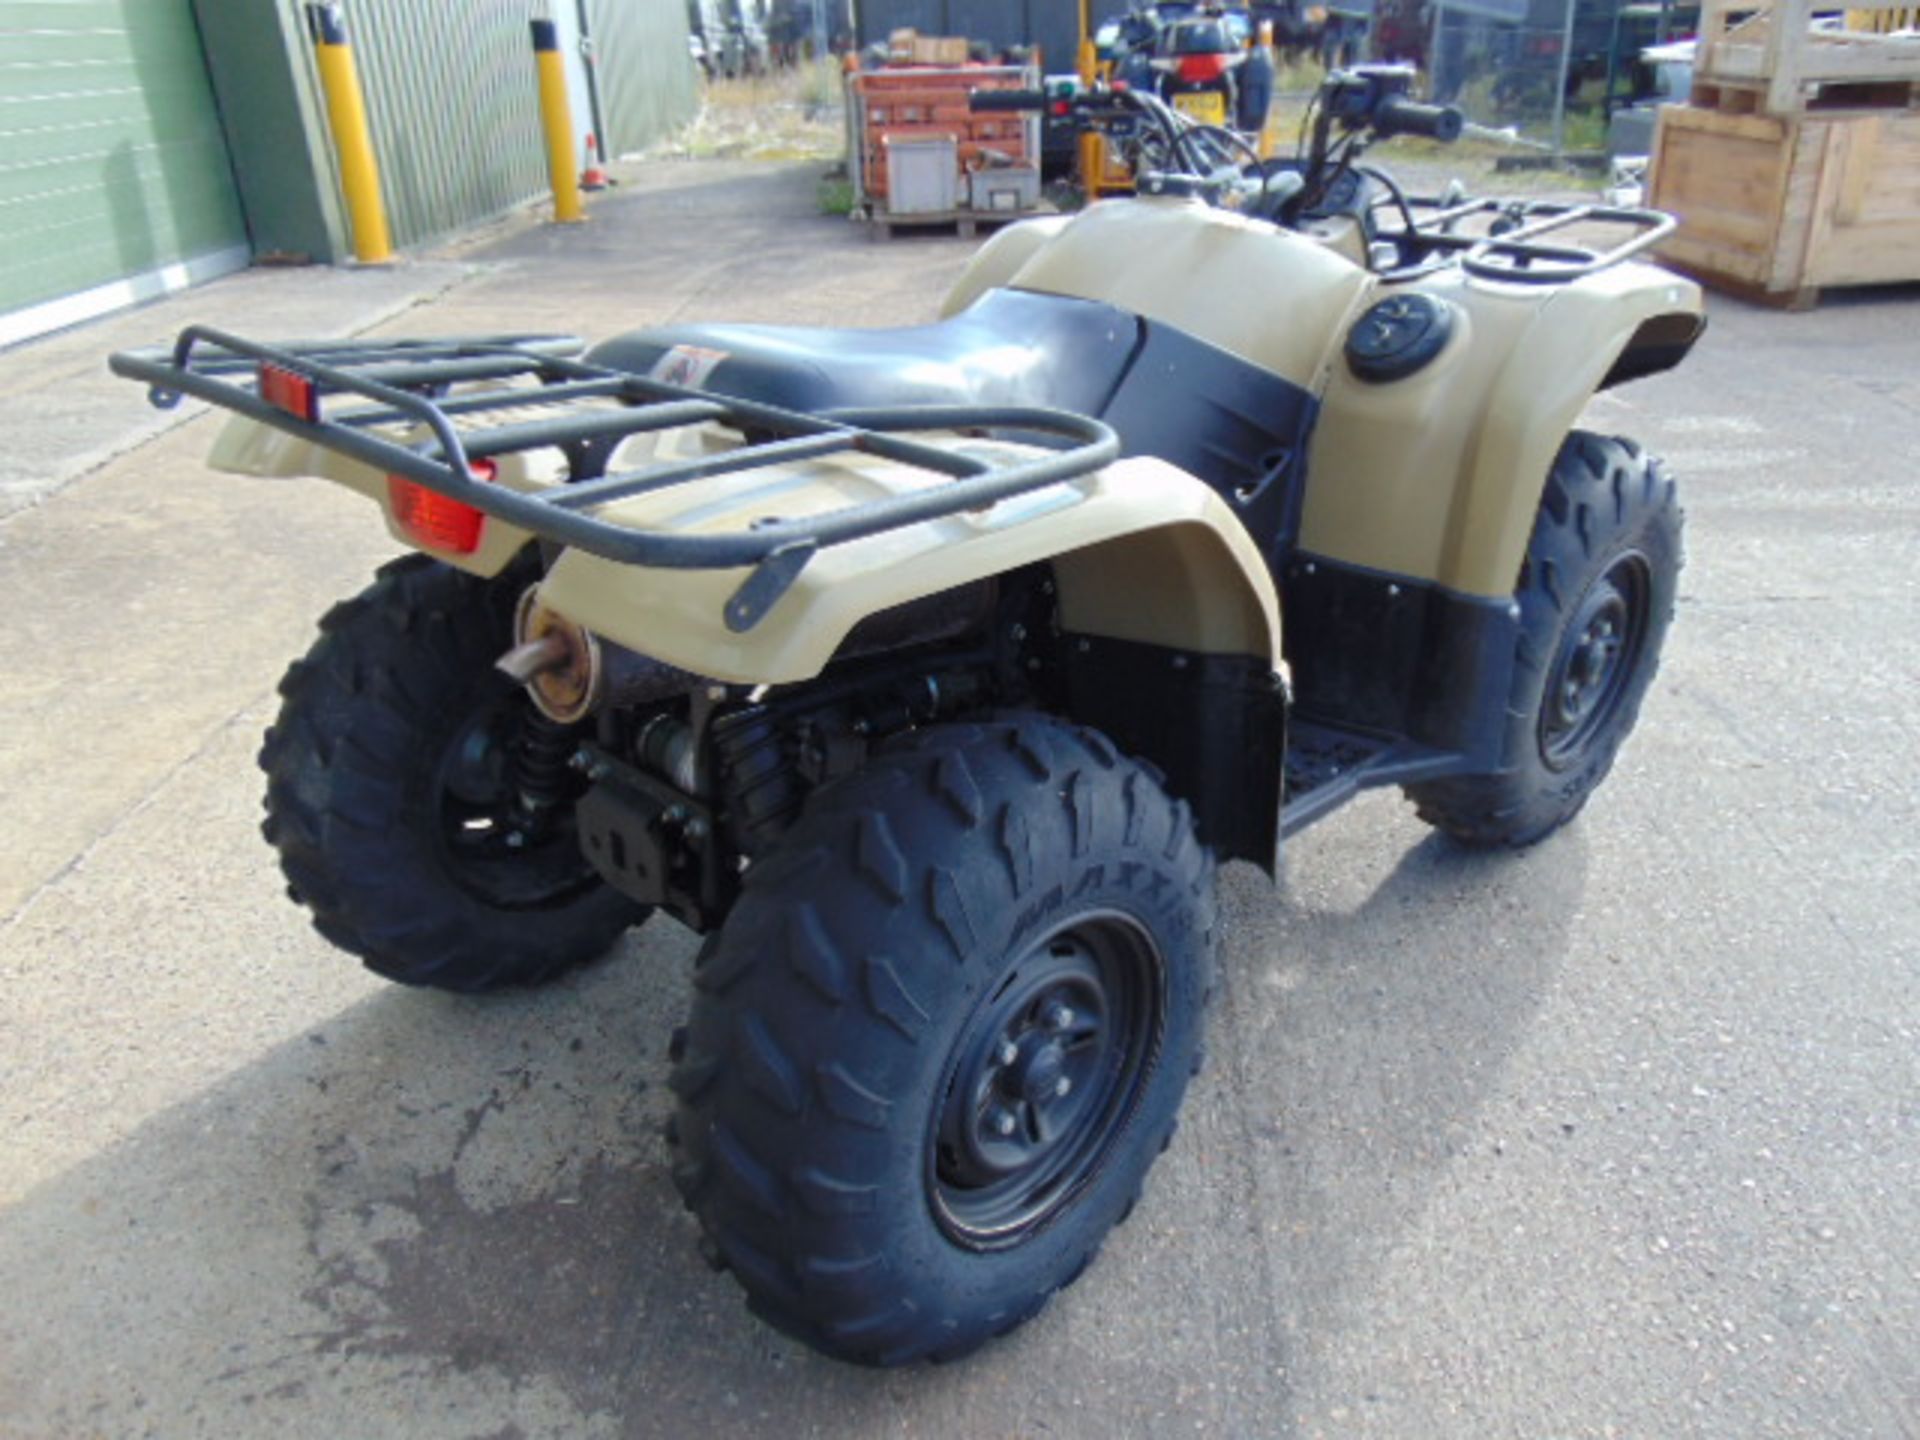 Military Specification Yamaha Grizzly 450 4 x 4 ATV Quad Bike Complete with Winch ONLY 130 HOURS! - Image 6 of 20